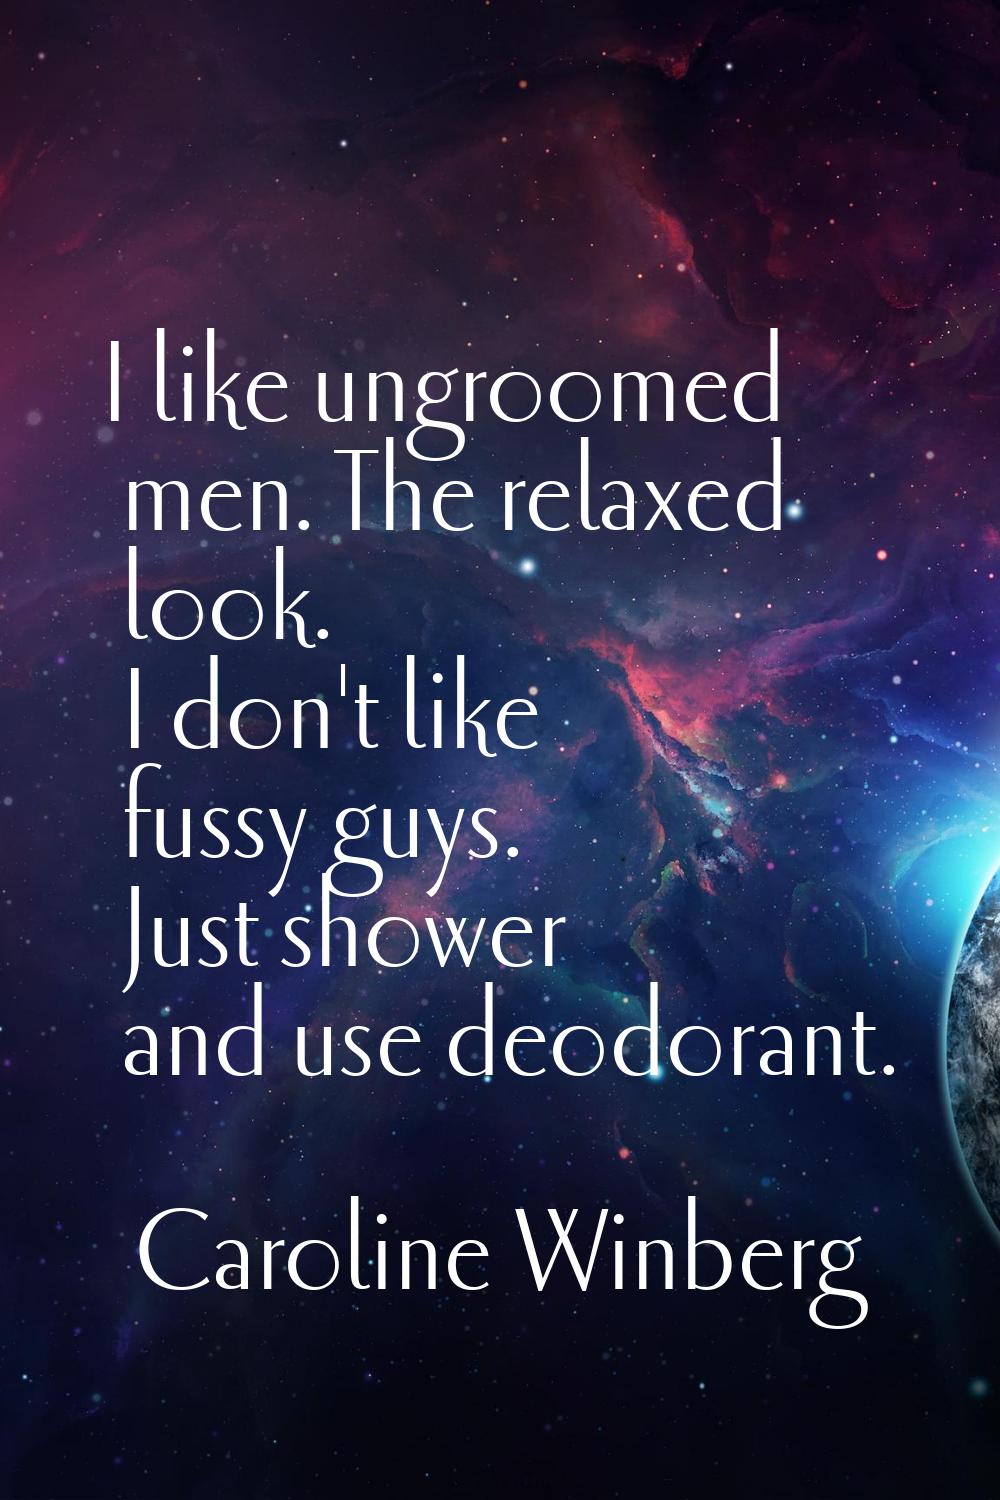 I like ungroomed men. The relaxed look. I don't like fussy guys. Just shower and use deodorant.